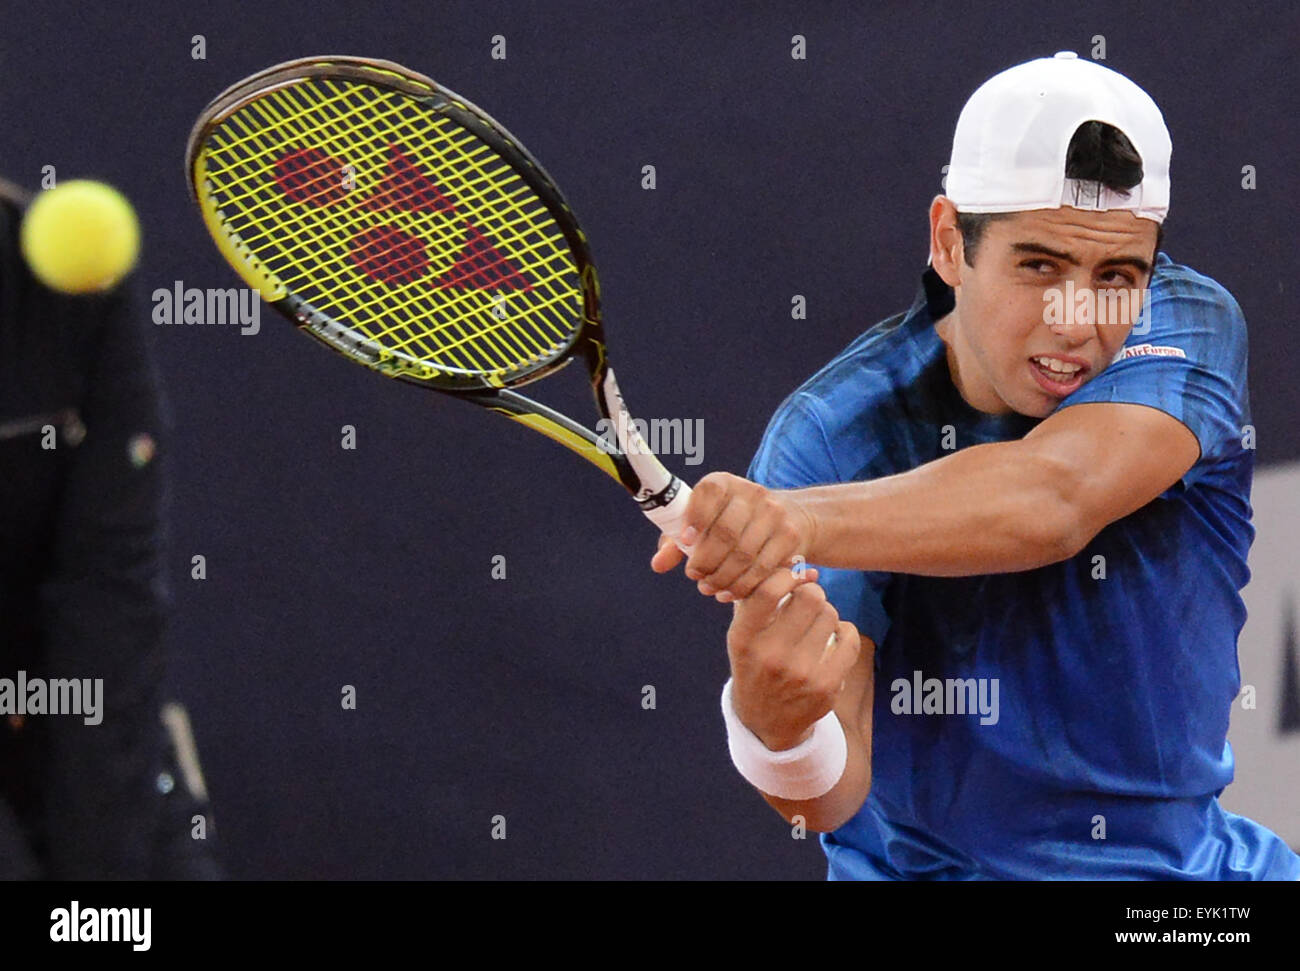 Hamburg, Germany. 30th July, 2015. Jaume Munar of Spain in action returns the ball during the round of sixteen match against Bolelli of Italy at the ATP-Tennis Tournament in Hamburg, Germany, 30 July 2015. Photo: Daniel Bockwoldt/dpa/Alamy Live News Stock Photo